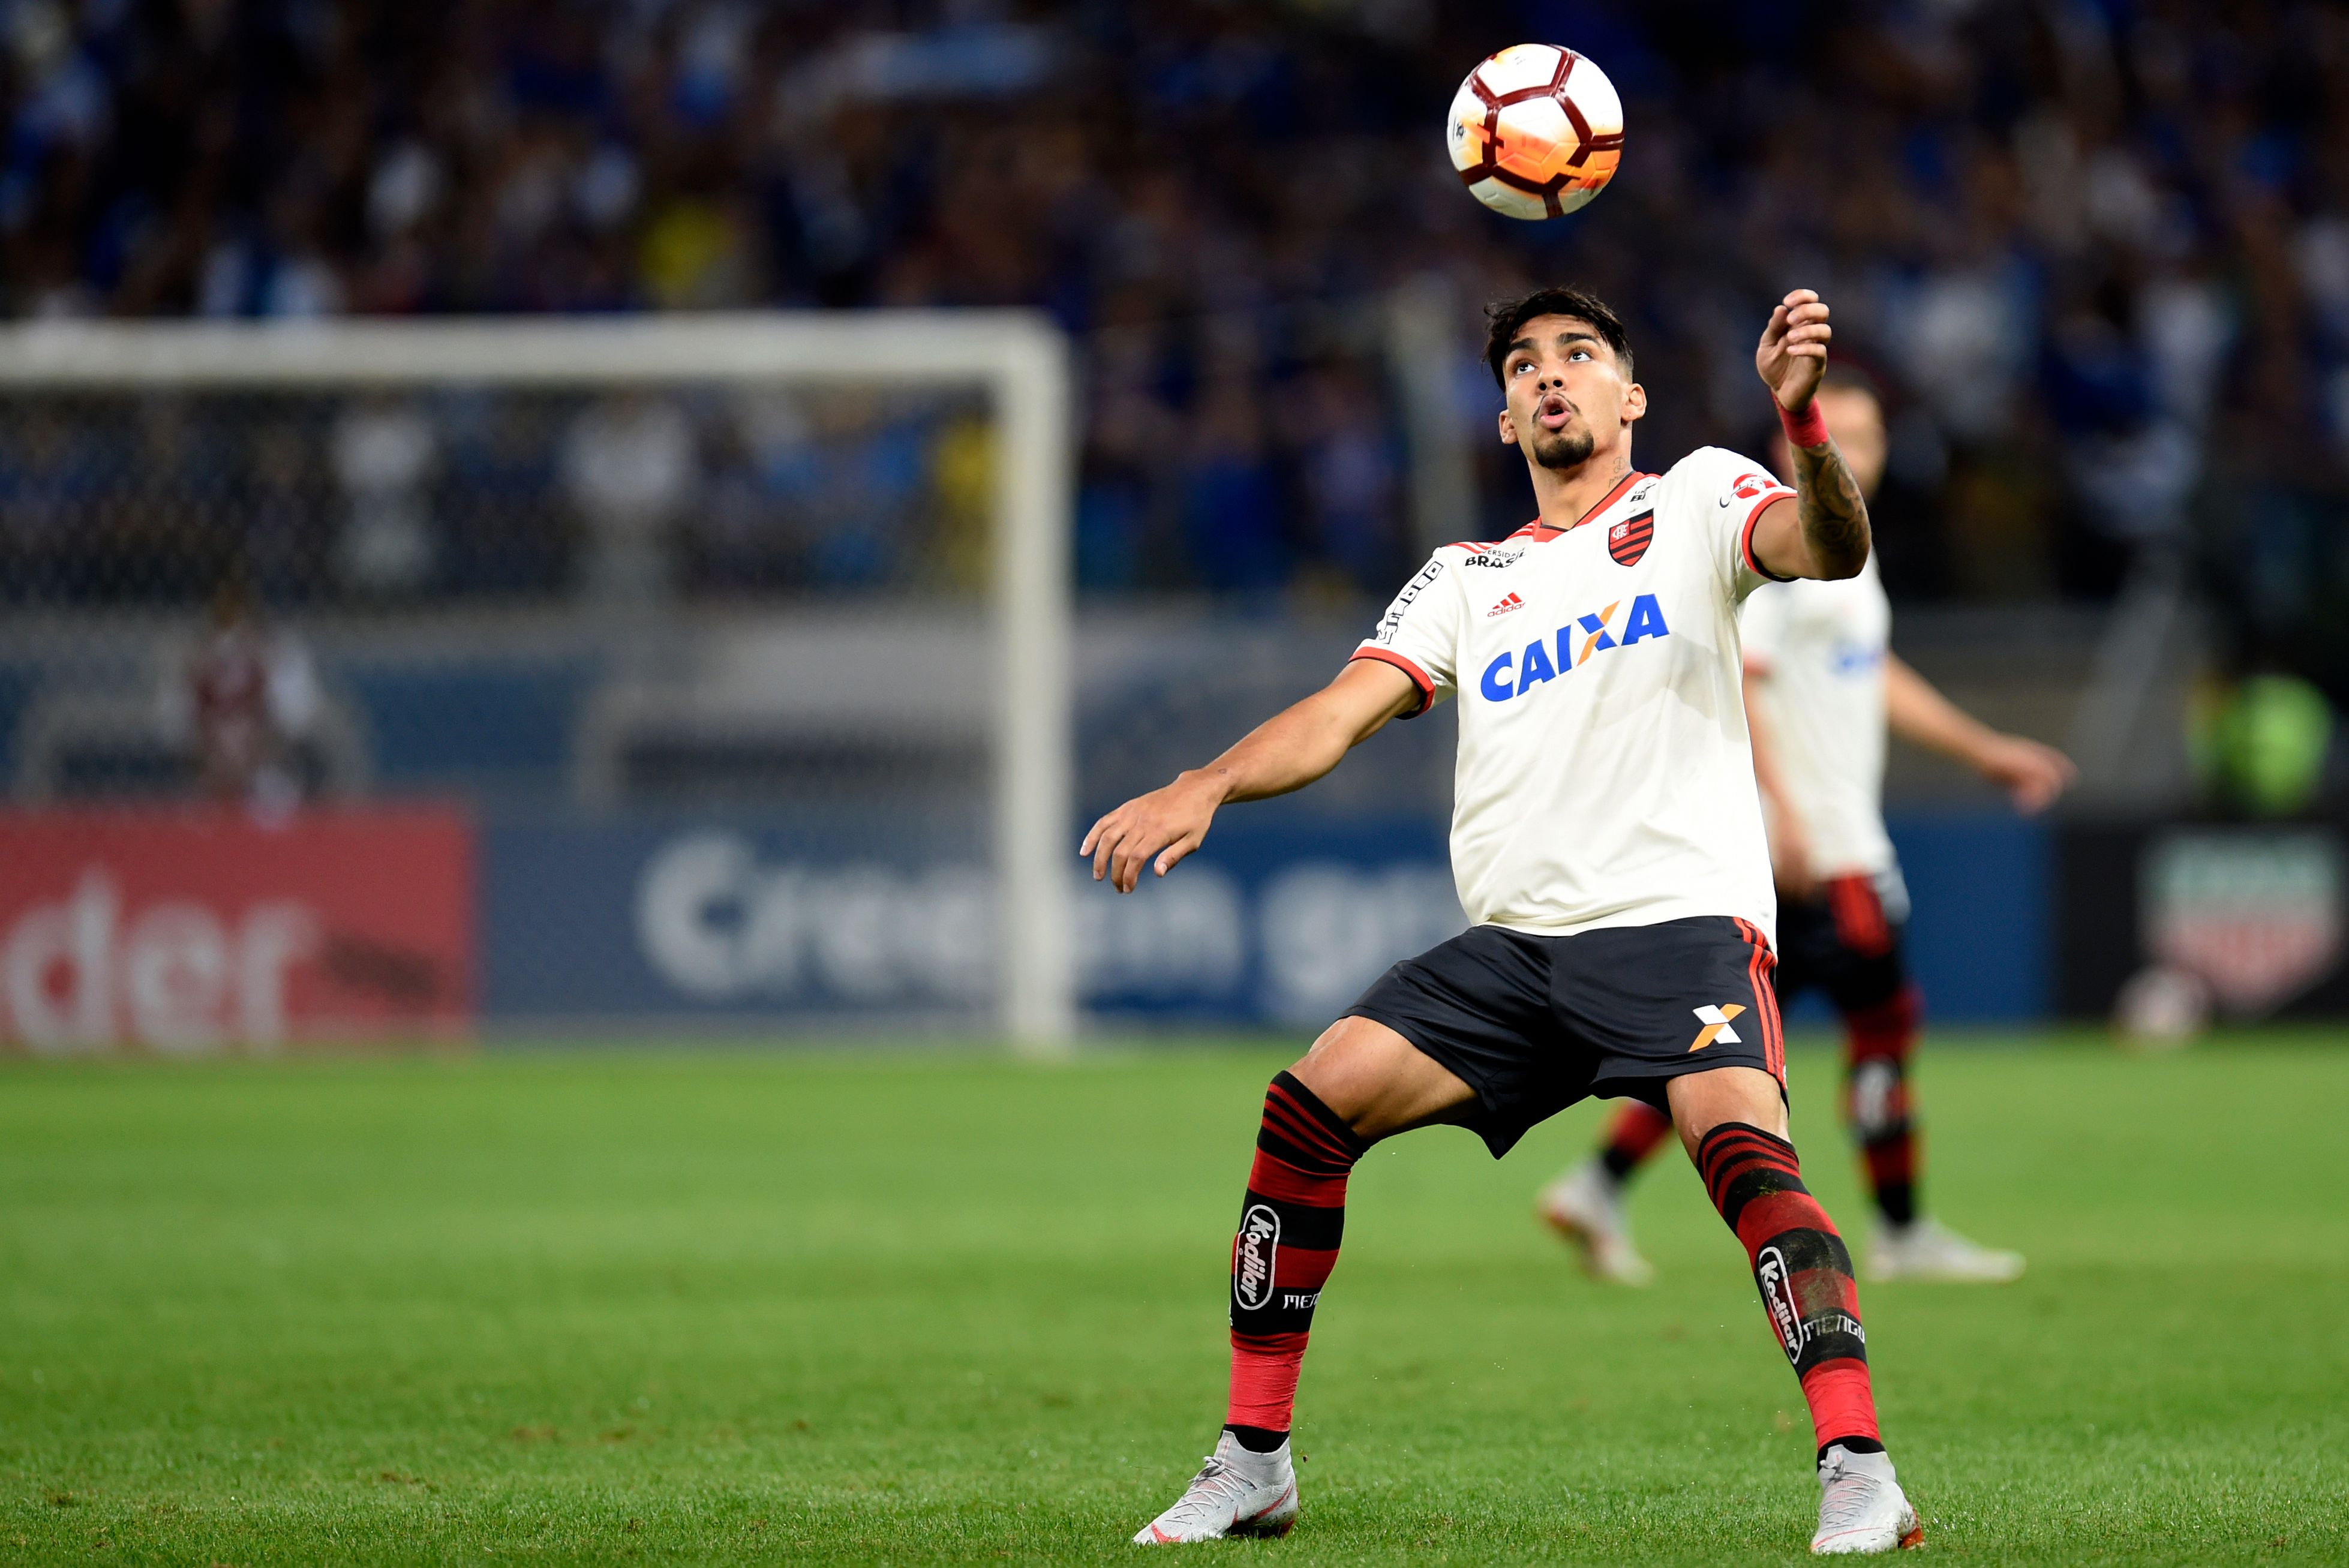 Lucas Paqueta of Brazil contros the ball during a 2018 Copa Libertadores match against Brazil's Cruzeiro at Mineirao stadium, in Belo Horizonte, Brazil, on August 29, 2018. (Photo by DOUGLAS MAGNO / AFP)        (Photo credit should read DOUGLAS MAGNO/AFP/Getty Images)